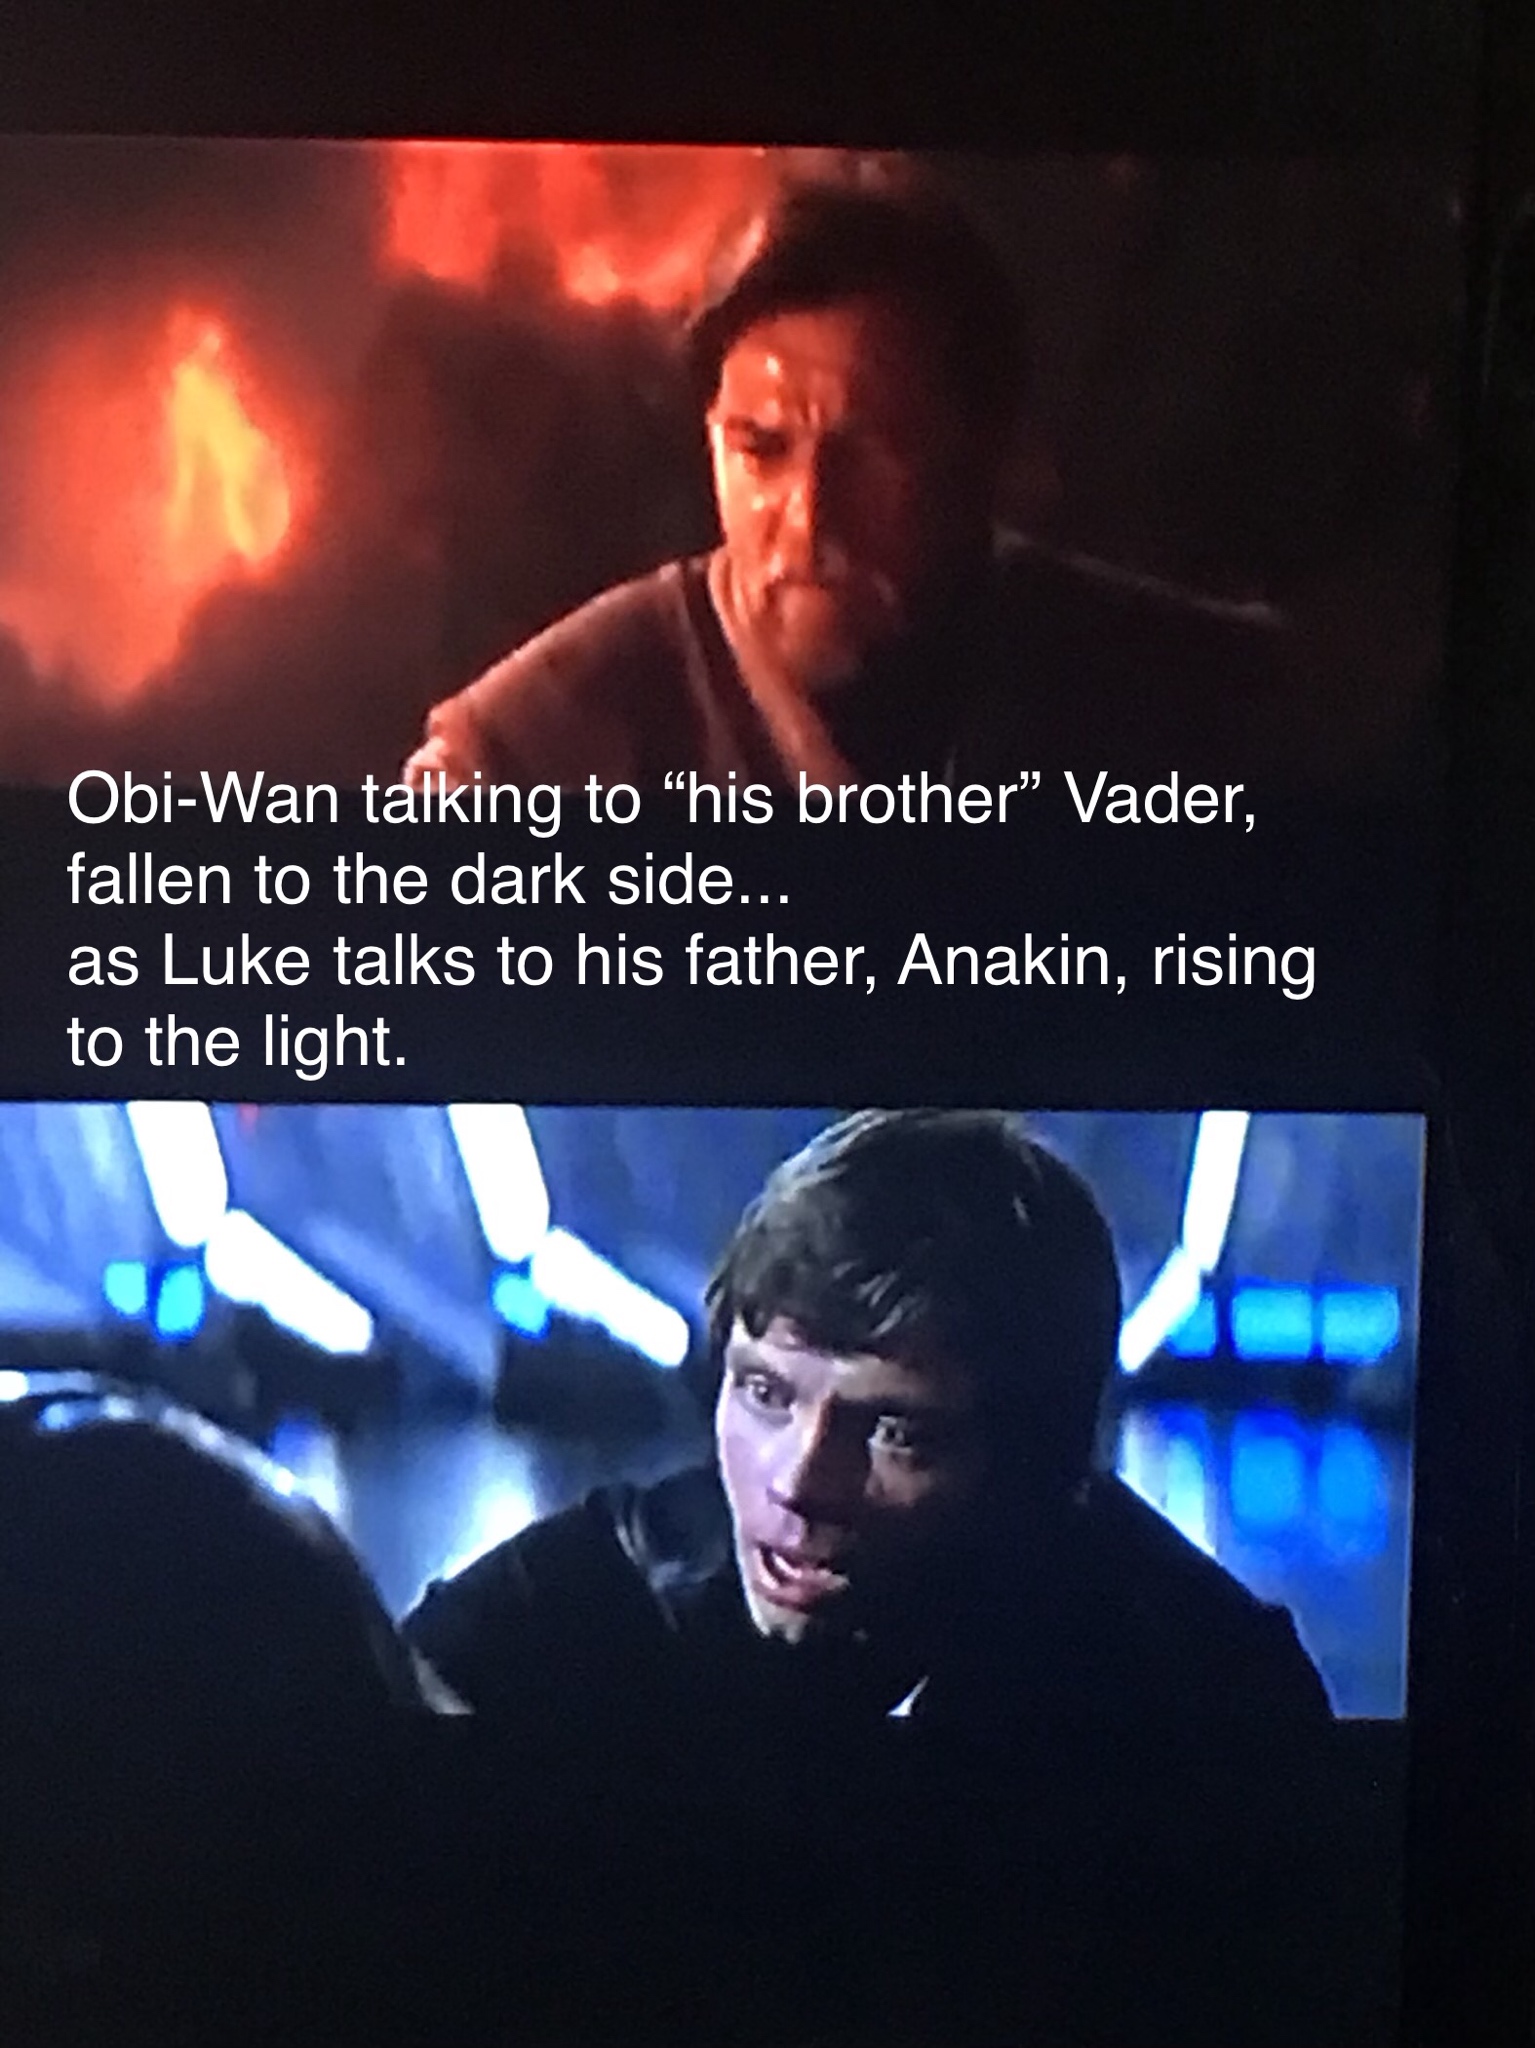 song - ObiWan talking to "his brother" Vader, fallen to the dark side... as Luke talks to his father, Anakin, rising to the light.